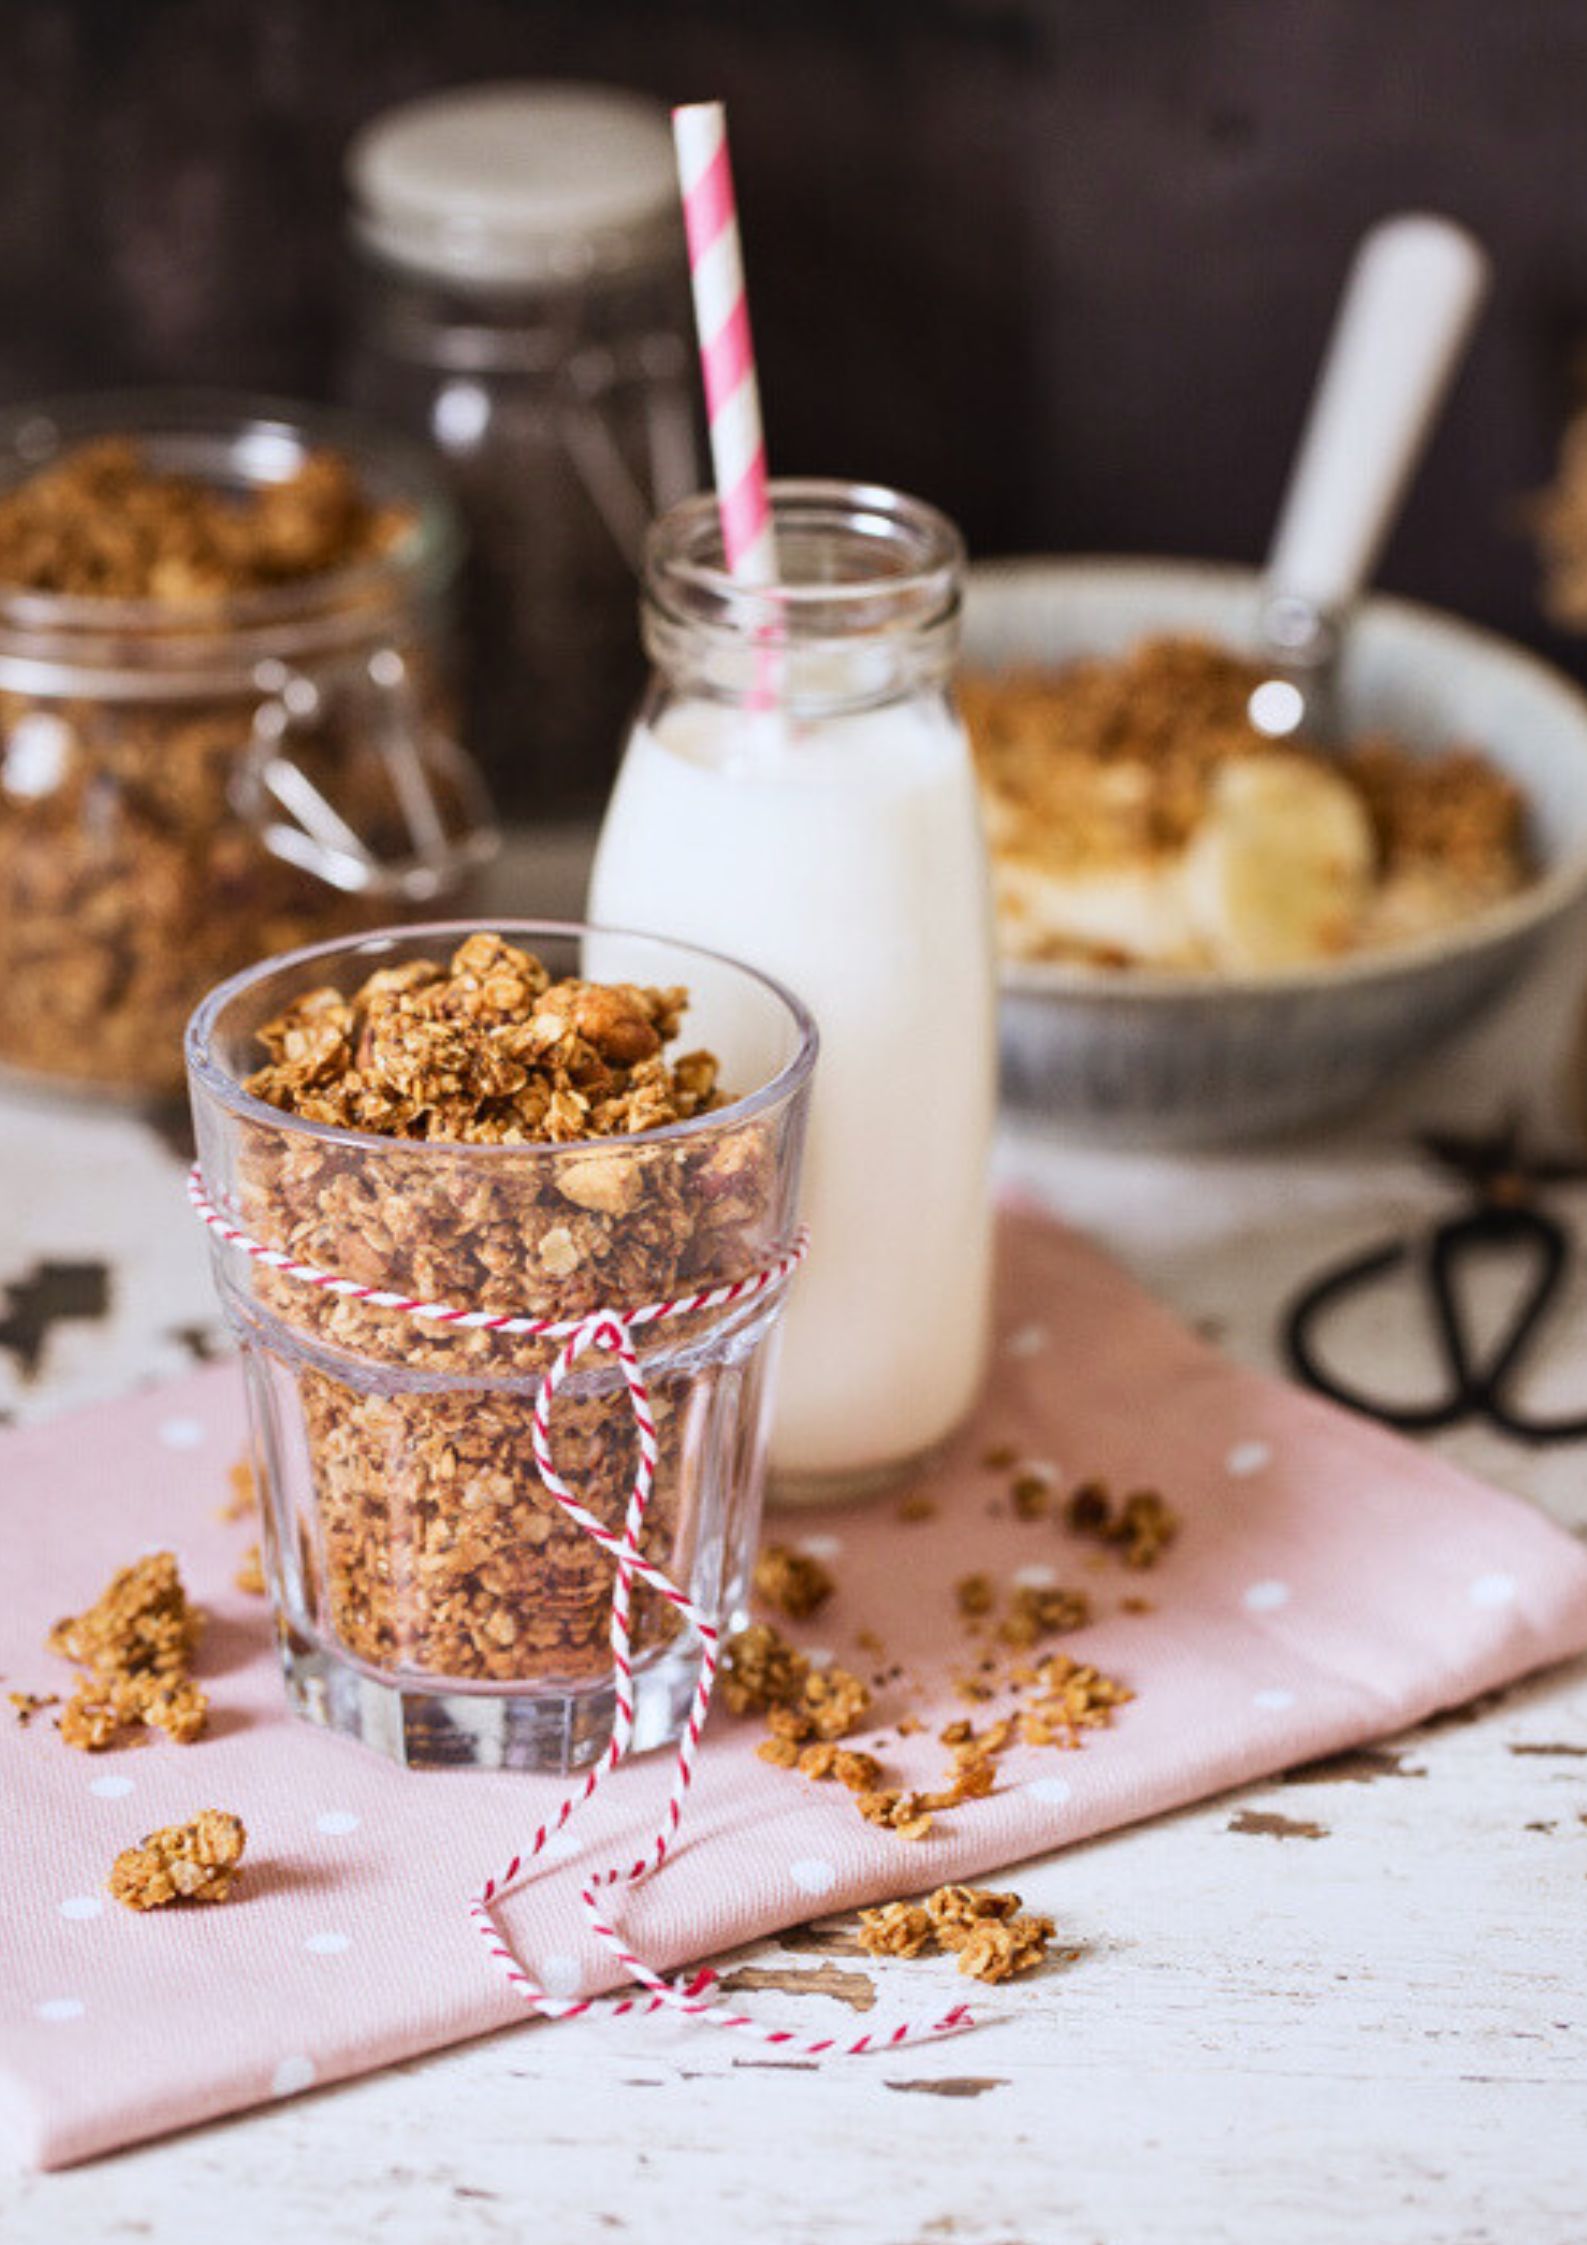 This healthy homemade granola made with chopped nuts, peanut butter and dark chocolate chips is the perfect make ahead breakfast or quick snack! Sugar free and gluten free too! Recipe on thecookandhim.com | #granola #homemadegranola #healthygranola #sugarfreebreakfast